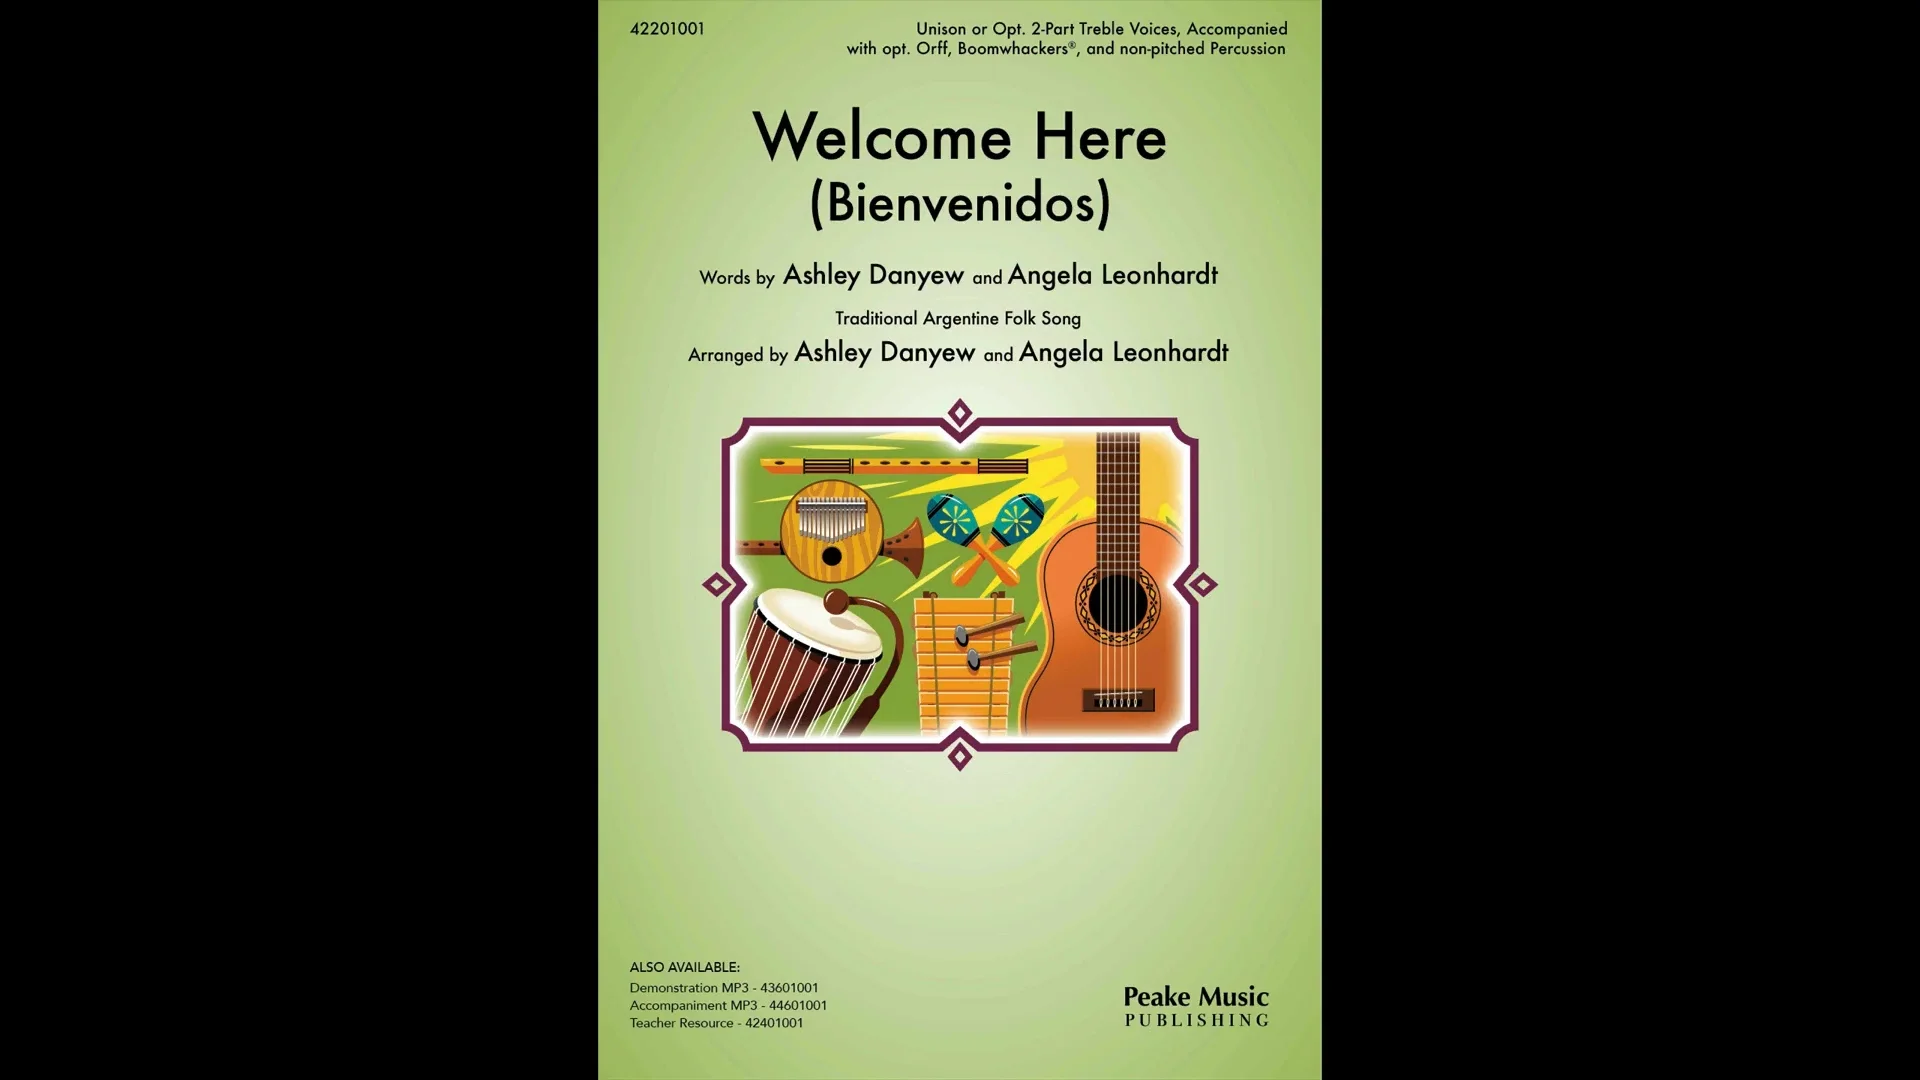 Sample: Welcome Here (Bienvenidos) from Peake Music Publishing